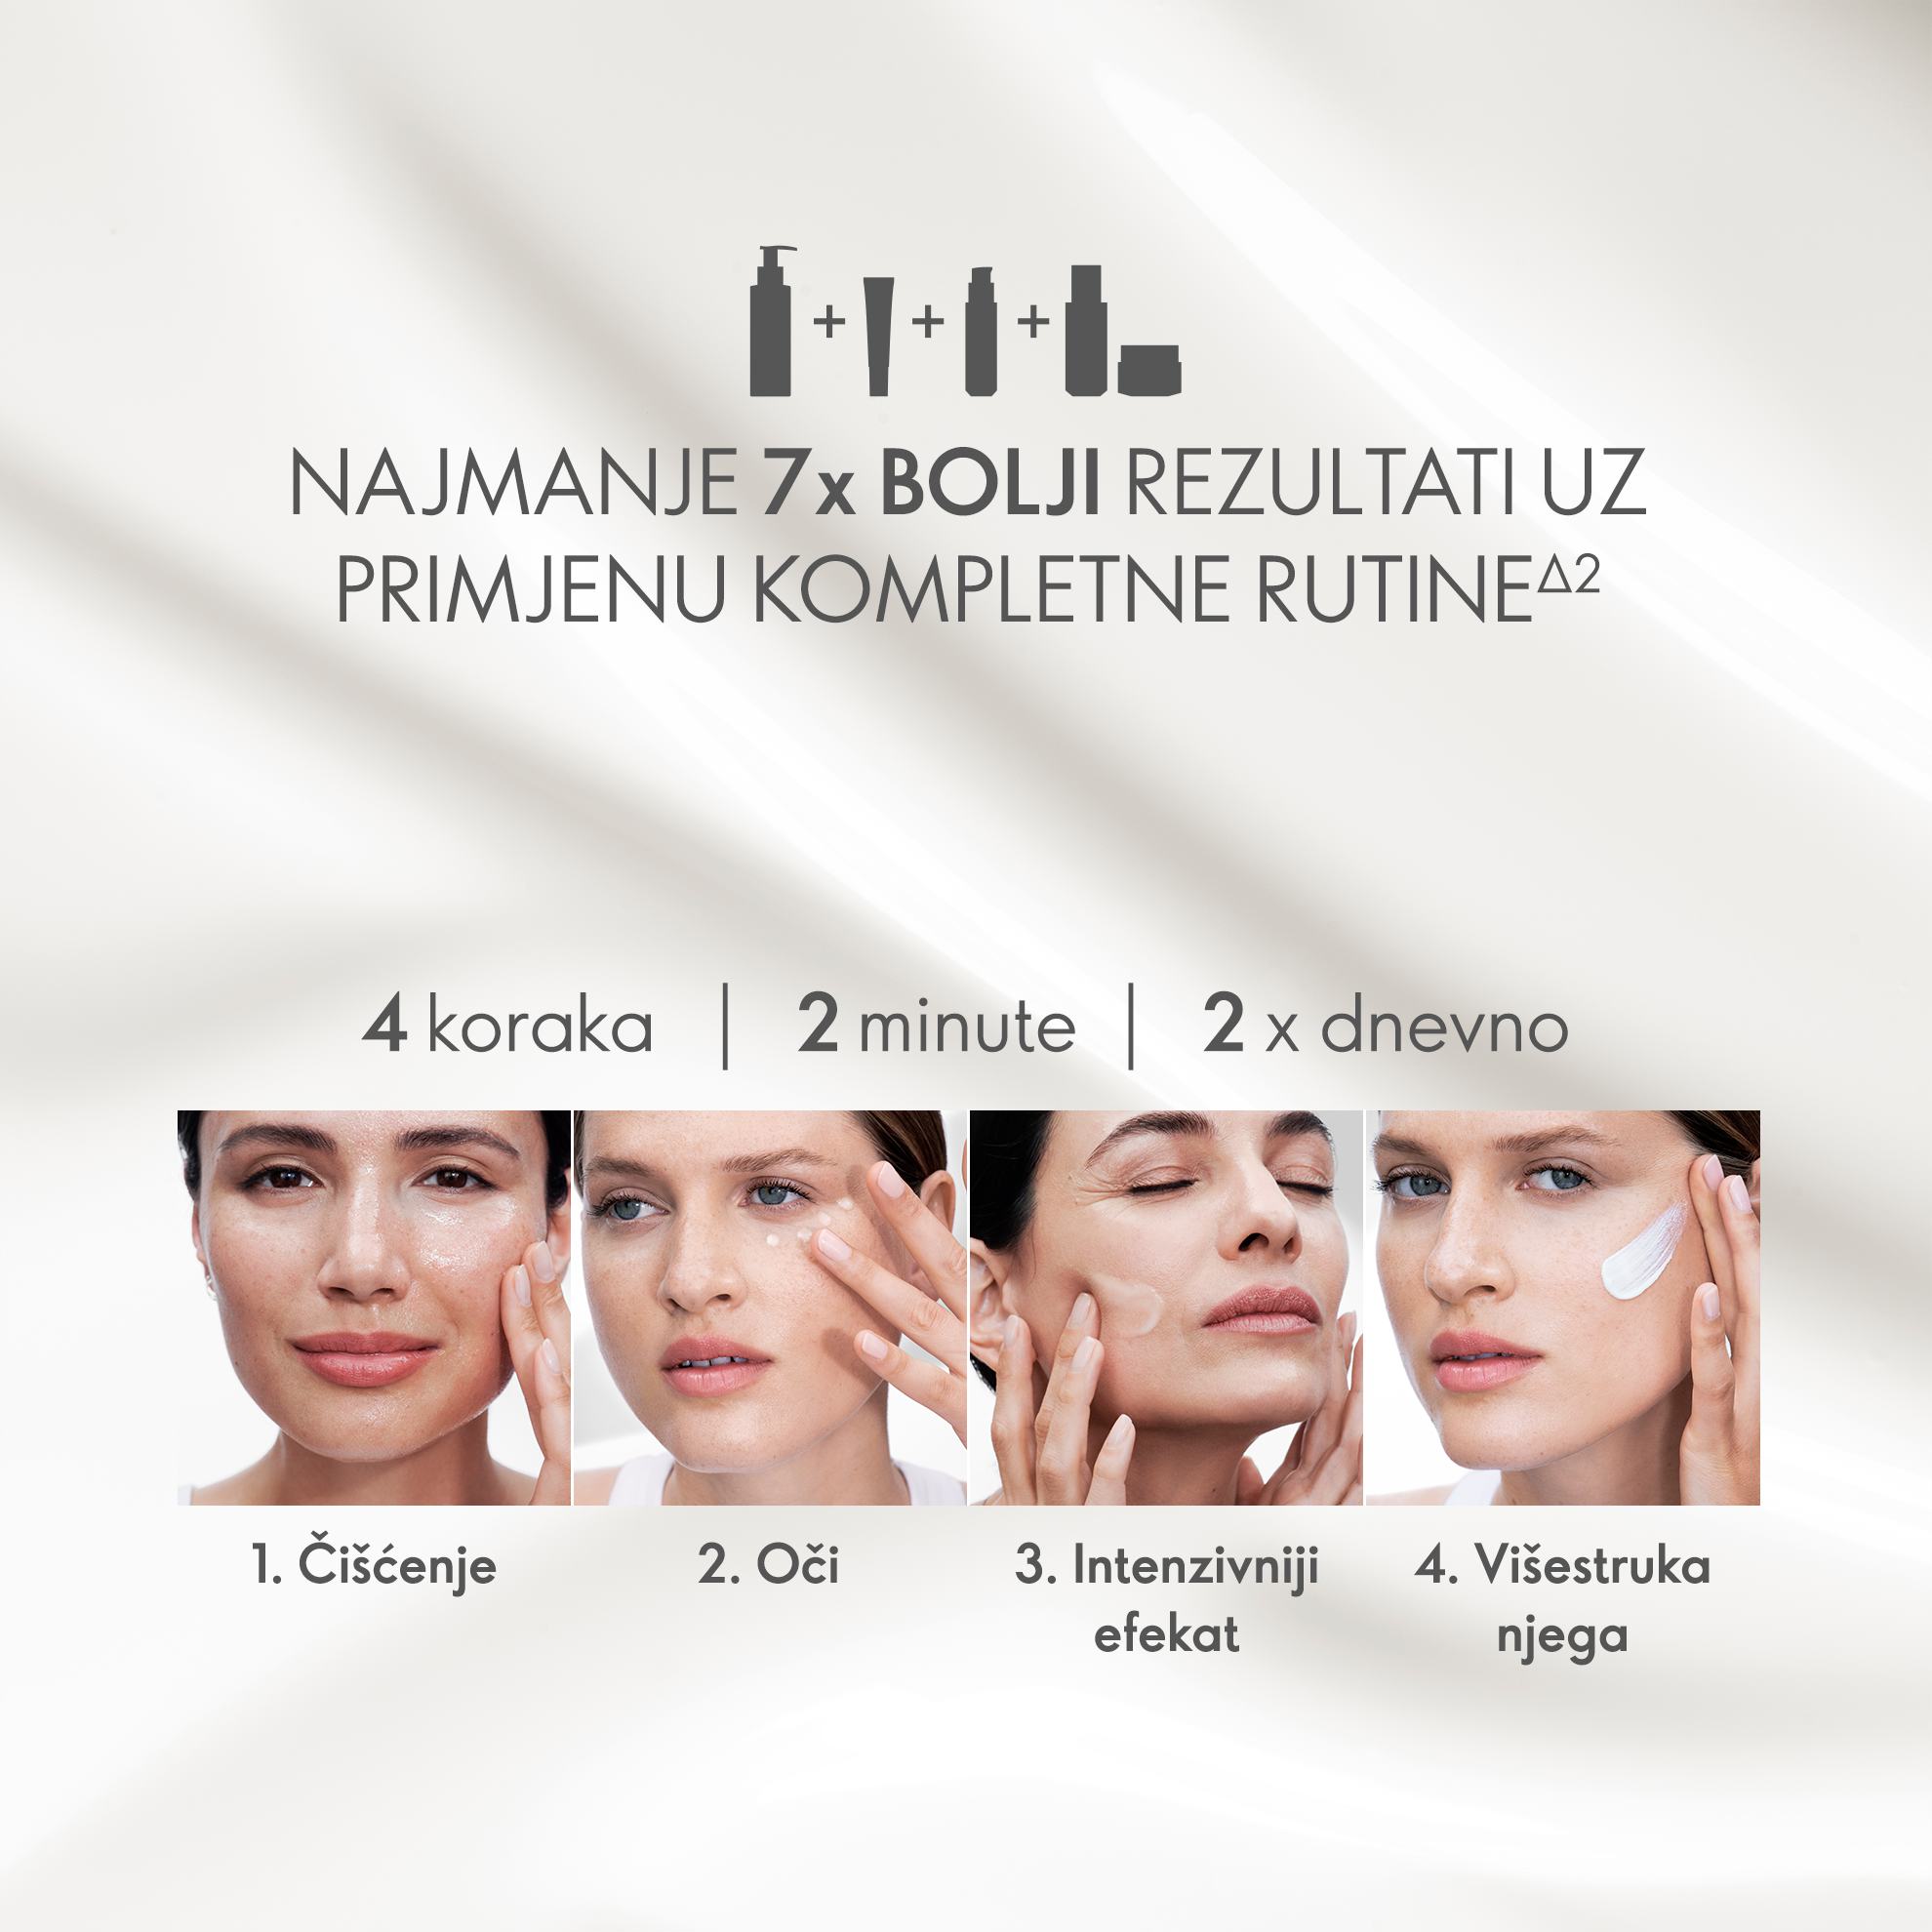 https://media-cdn.oriflame.com/productImage?externalMediaId=product-management-media%2fProducts%2f43691%2fBA%2f43691_4.png&id=17590779&version=2